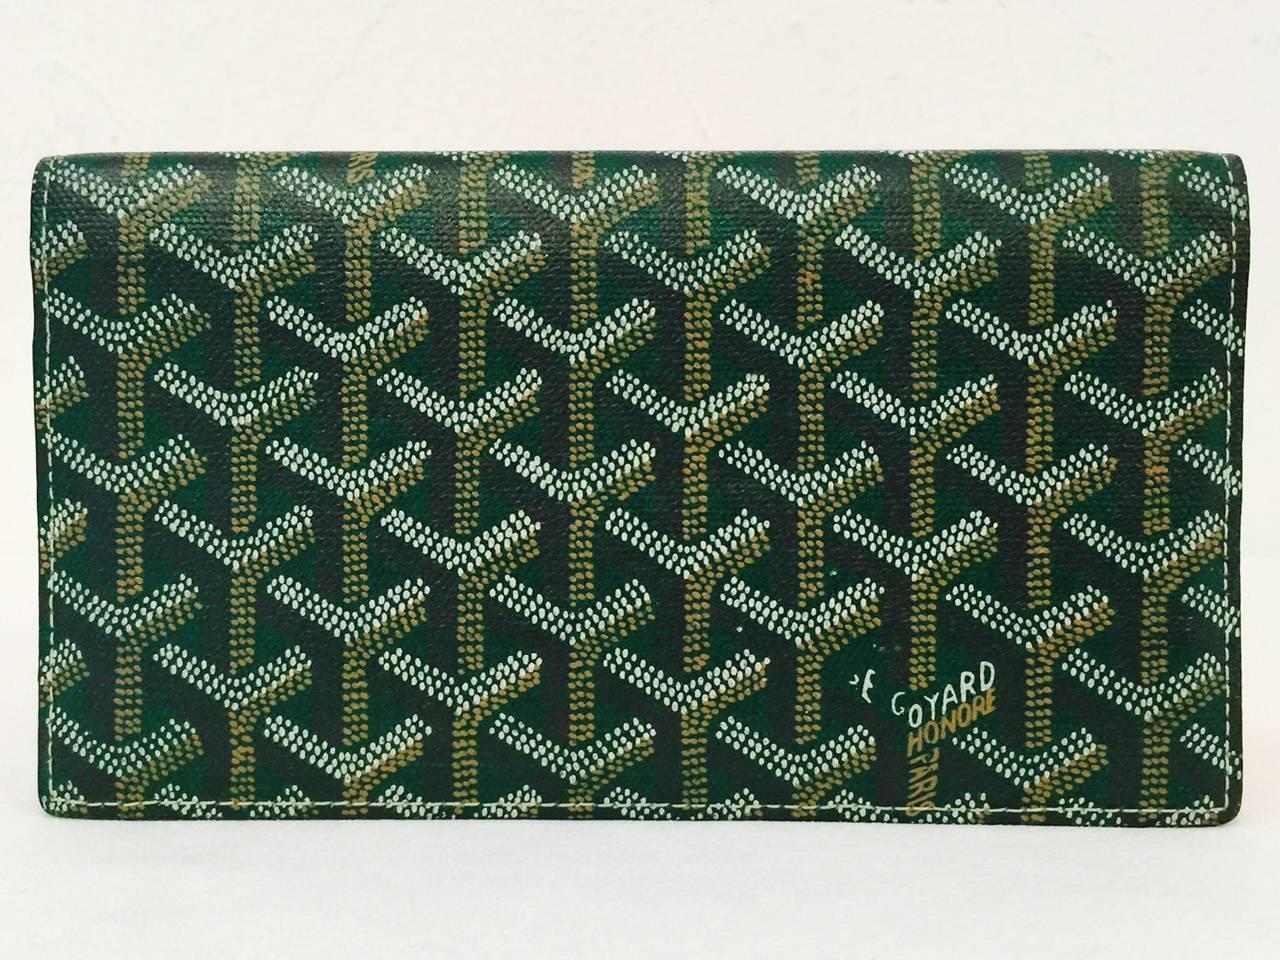 Goyard Green Goyardine Long Wallet is in Excellent Condition! No wonder these small leather goods are coveted the world over...by women AND men!  Features several card slots, cash compartments, and even a zippered compartment.  Smooth green and gold